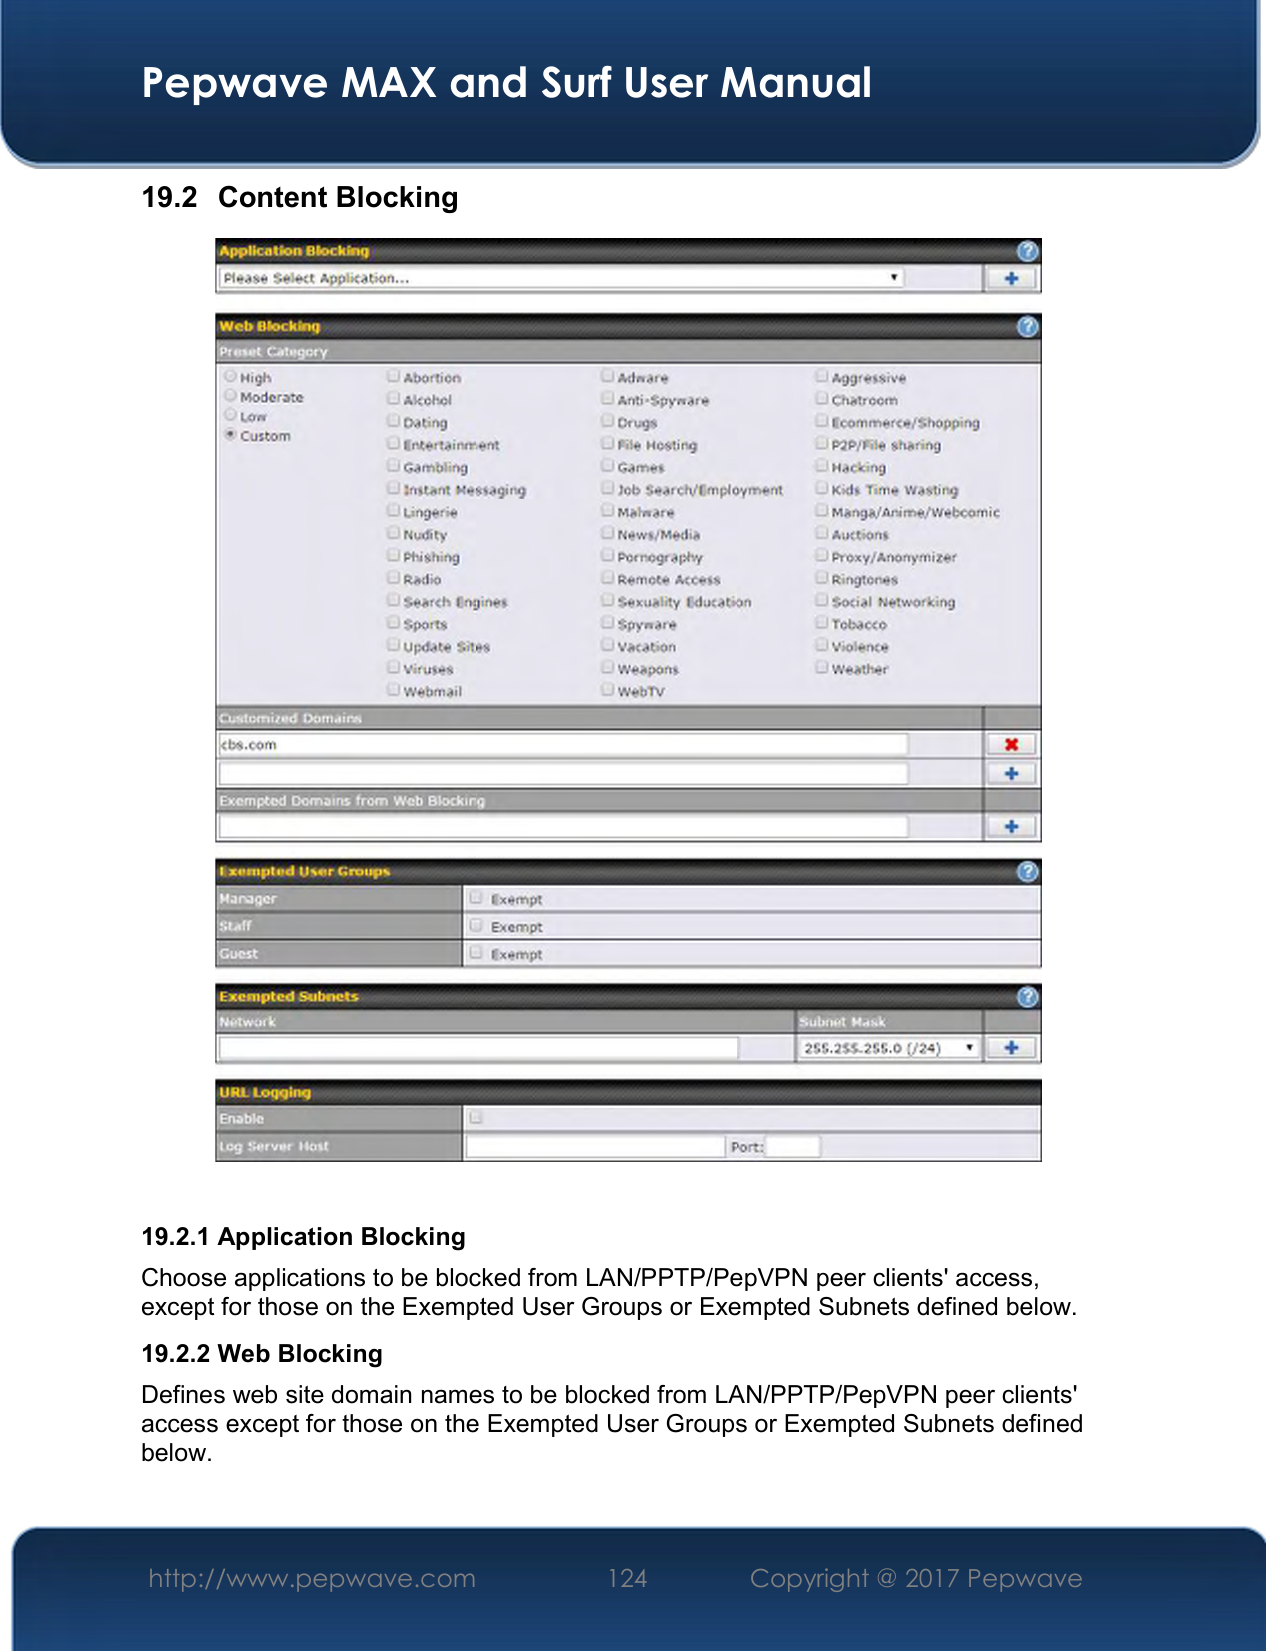  Pepwave MAX and Surf User Manual http://www.pepwave.com  124    Copyright @ 2017 Pepwave   19.2  Content Blocking   19.2.1 Application Blocking Choose applications to be blocked from LAN/PPTP/PepVPN peer clients&apos; access, except for those on the Exempted User Groups or Exempted Subnets defined below. 19.2.2 Web Blocking Defines web site domain names to be blocked from LAN/PPTP/PepVPN peer clients&apos; access except for those on the Exempted User Groups or Exempted Subnets defined below.  